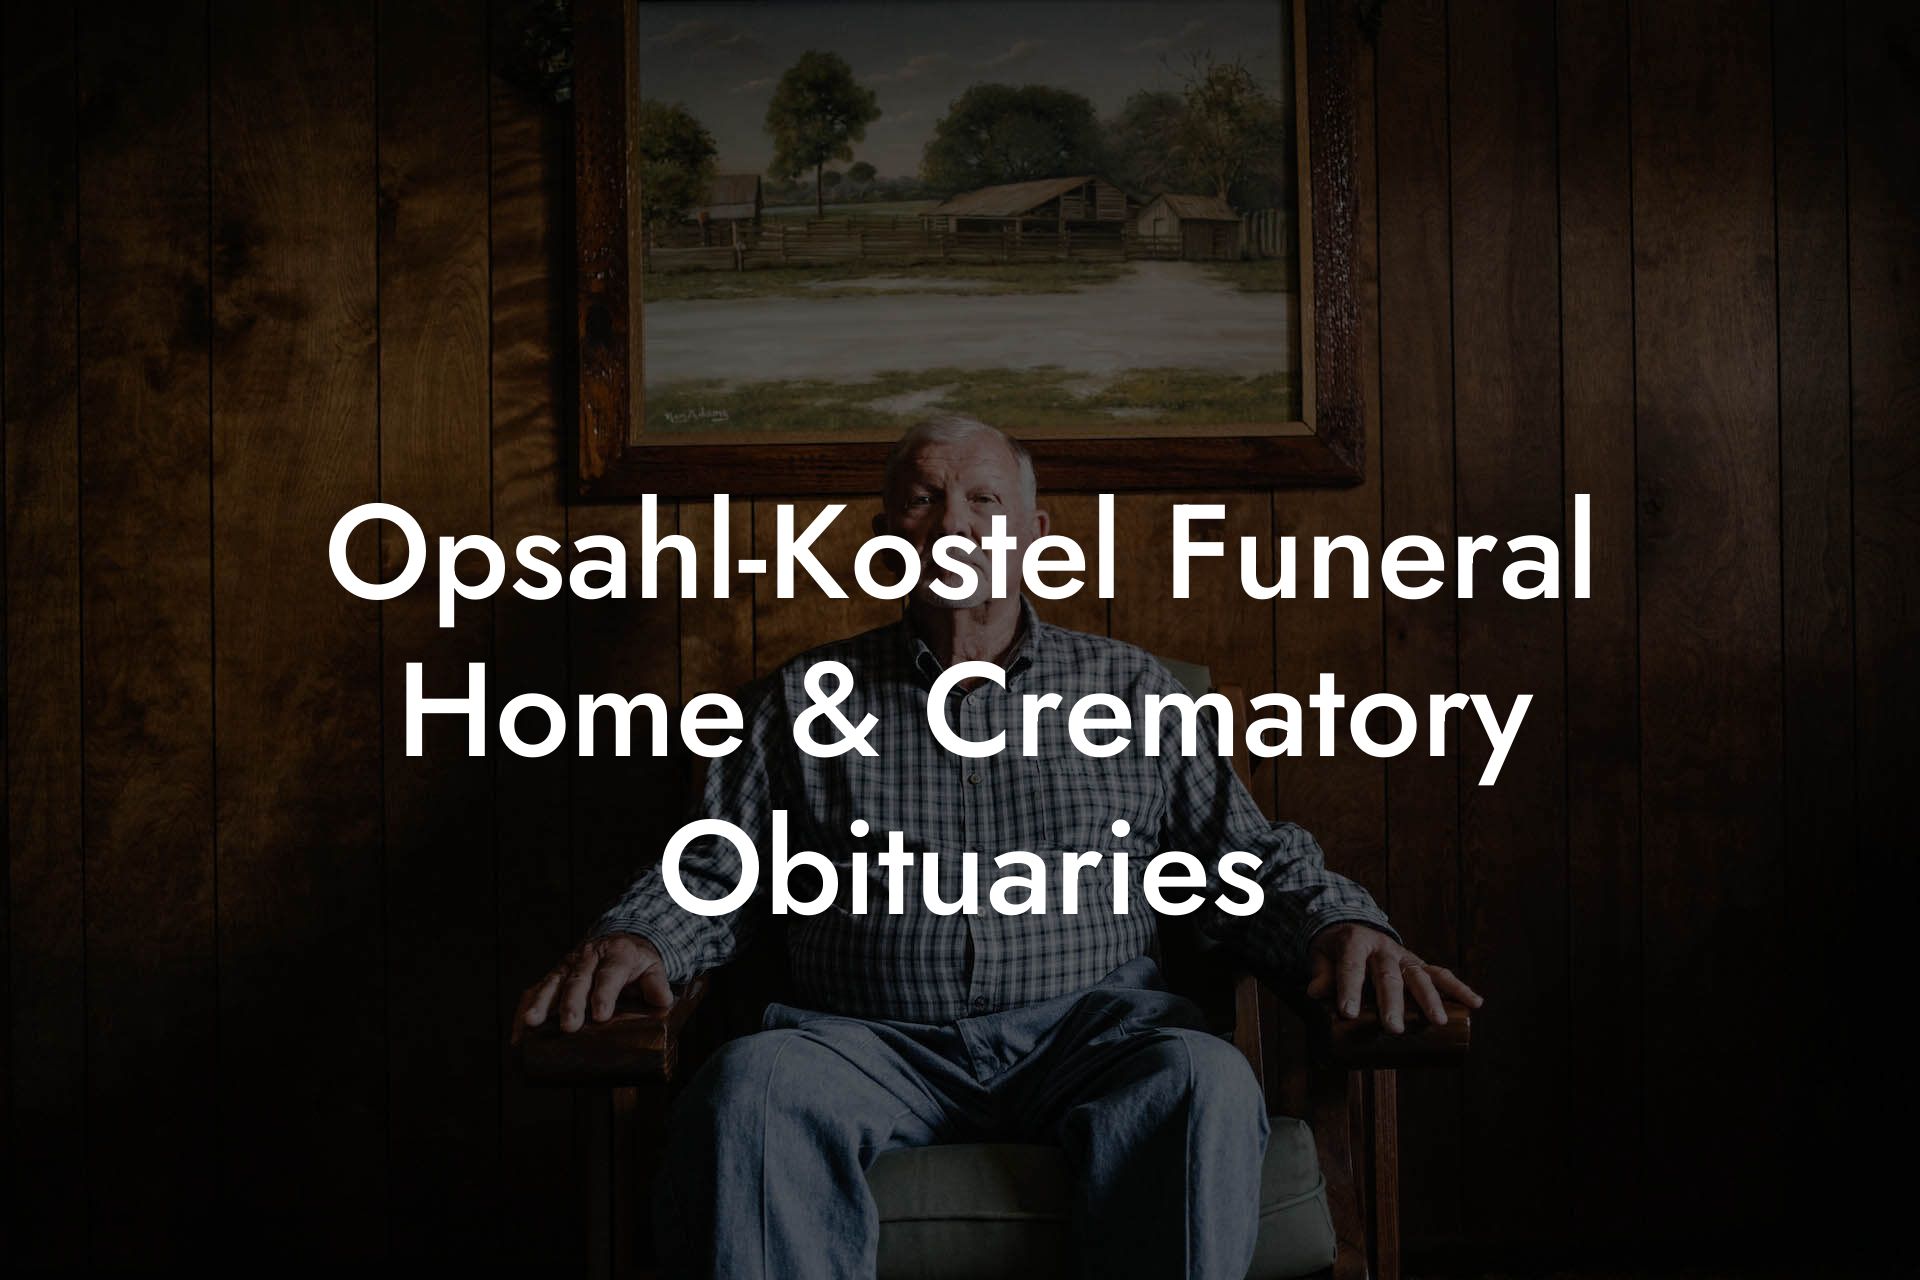 Opsahl-Kostel Funeral Home & Crematory Obituaries